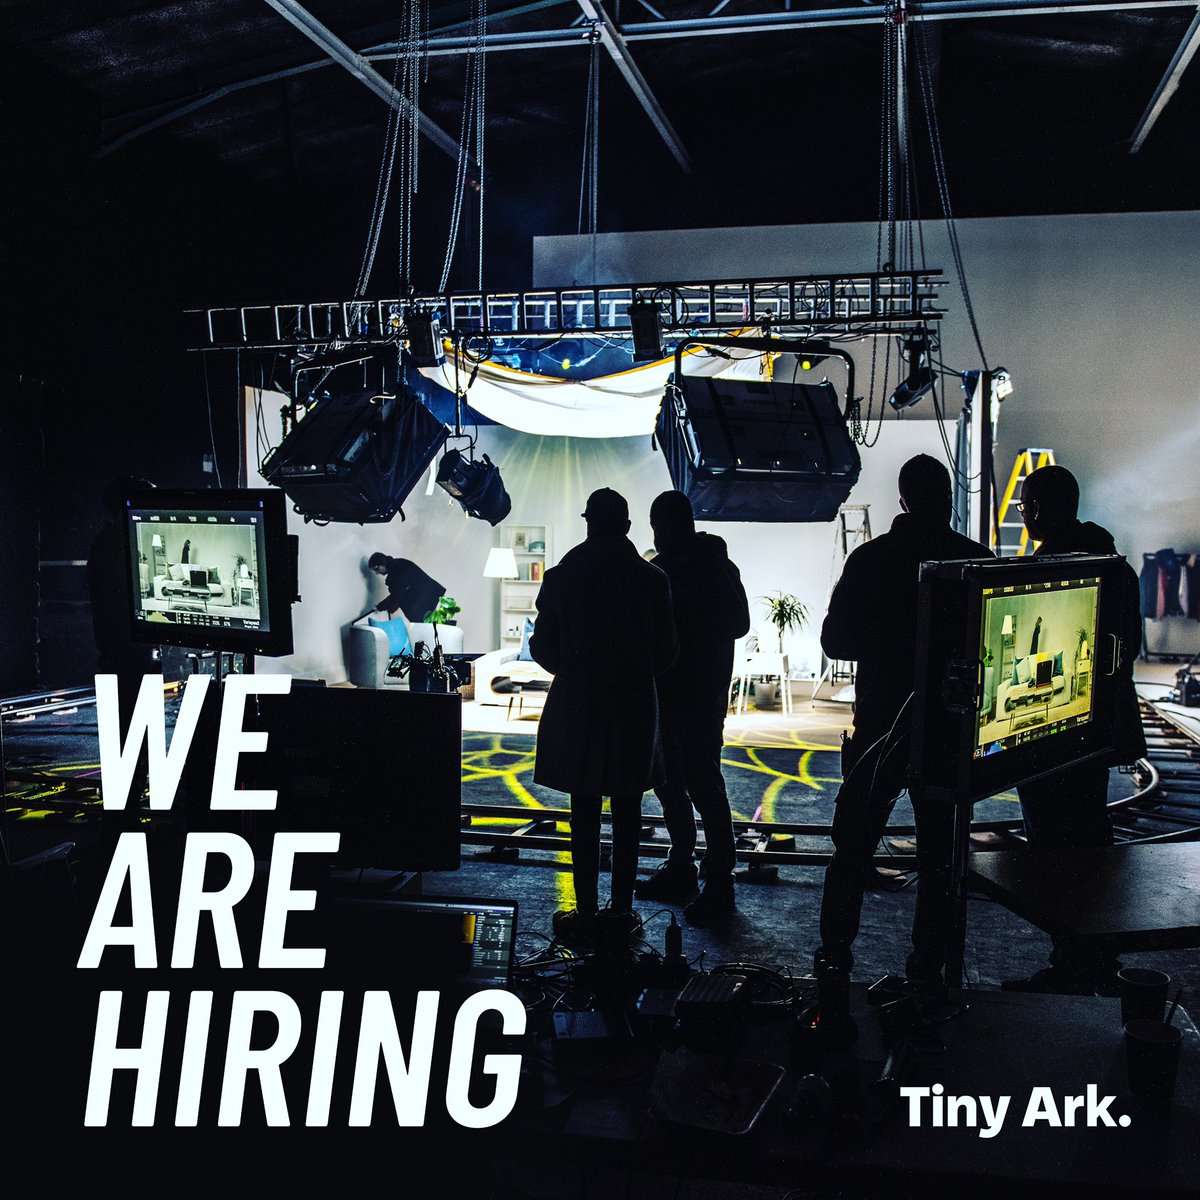 Tiny Ark are looking for an experienced and ambitious producer to join our studio in Dublin. Apply: tinyark.typeform.com/to/UIAW7znG